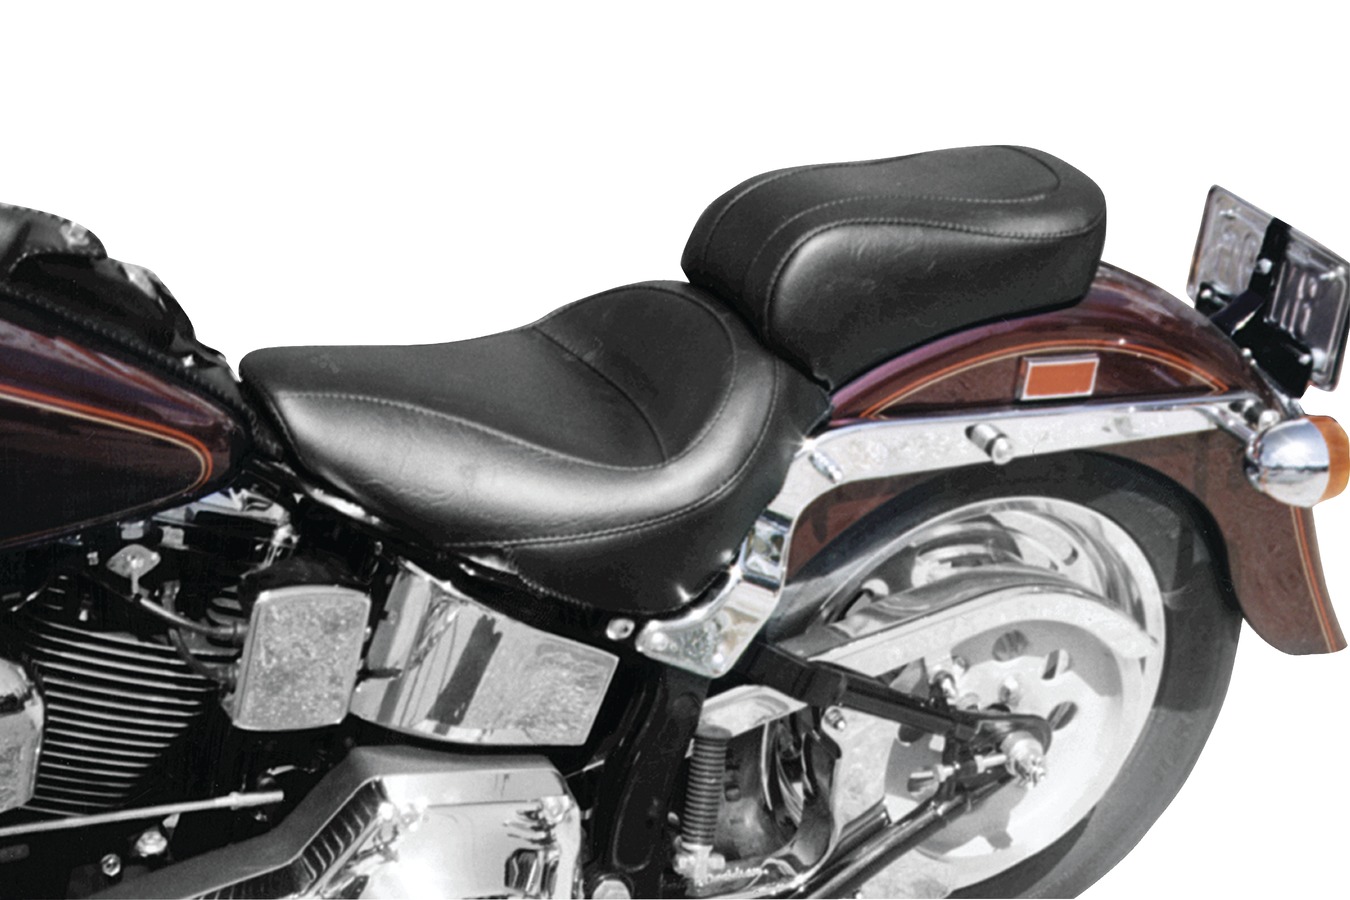 Standard Touring One-Piece Seat for Harley-Davidson Softail Standard Rear Tire 1984-